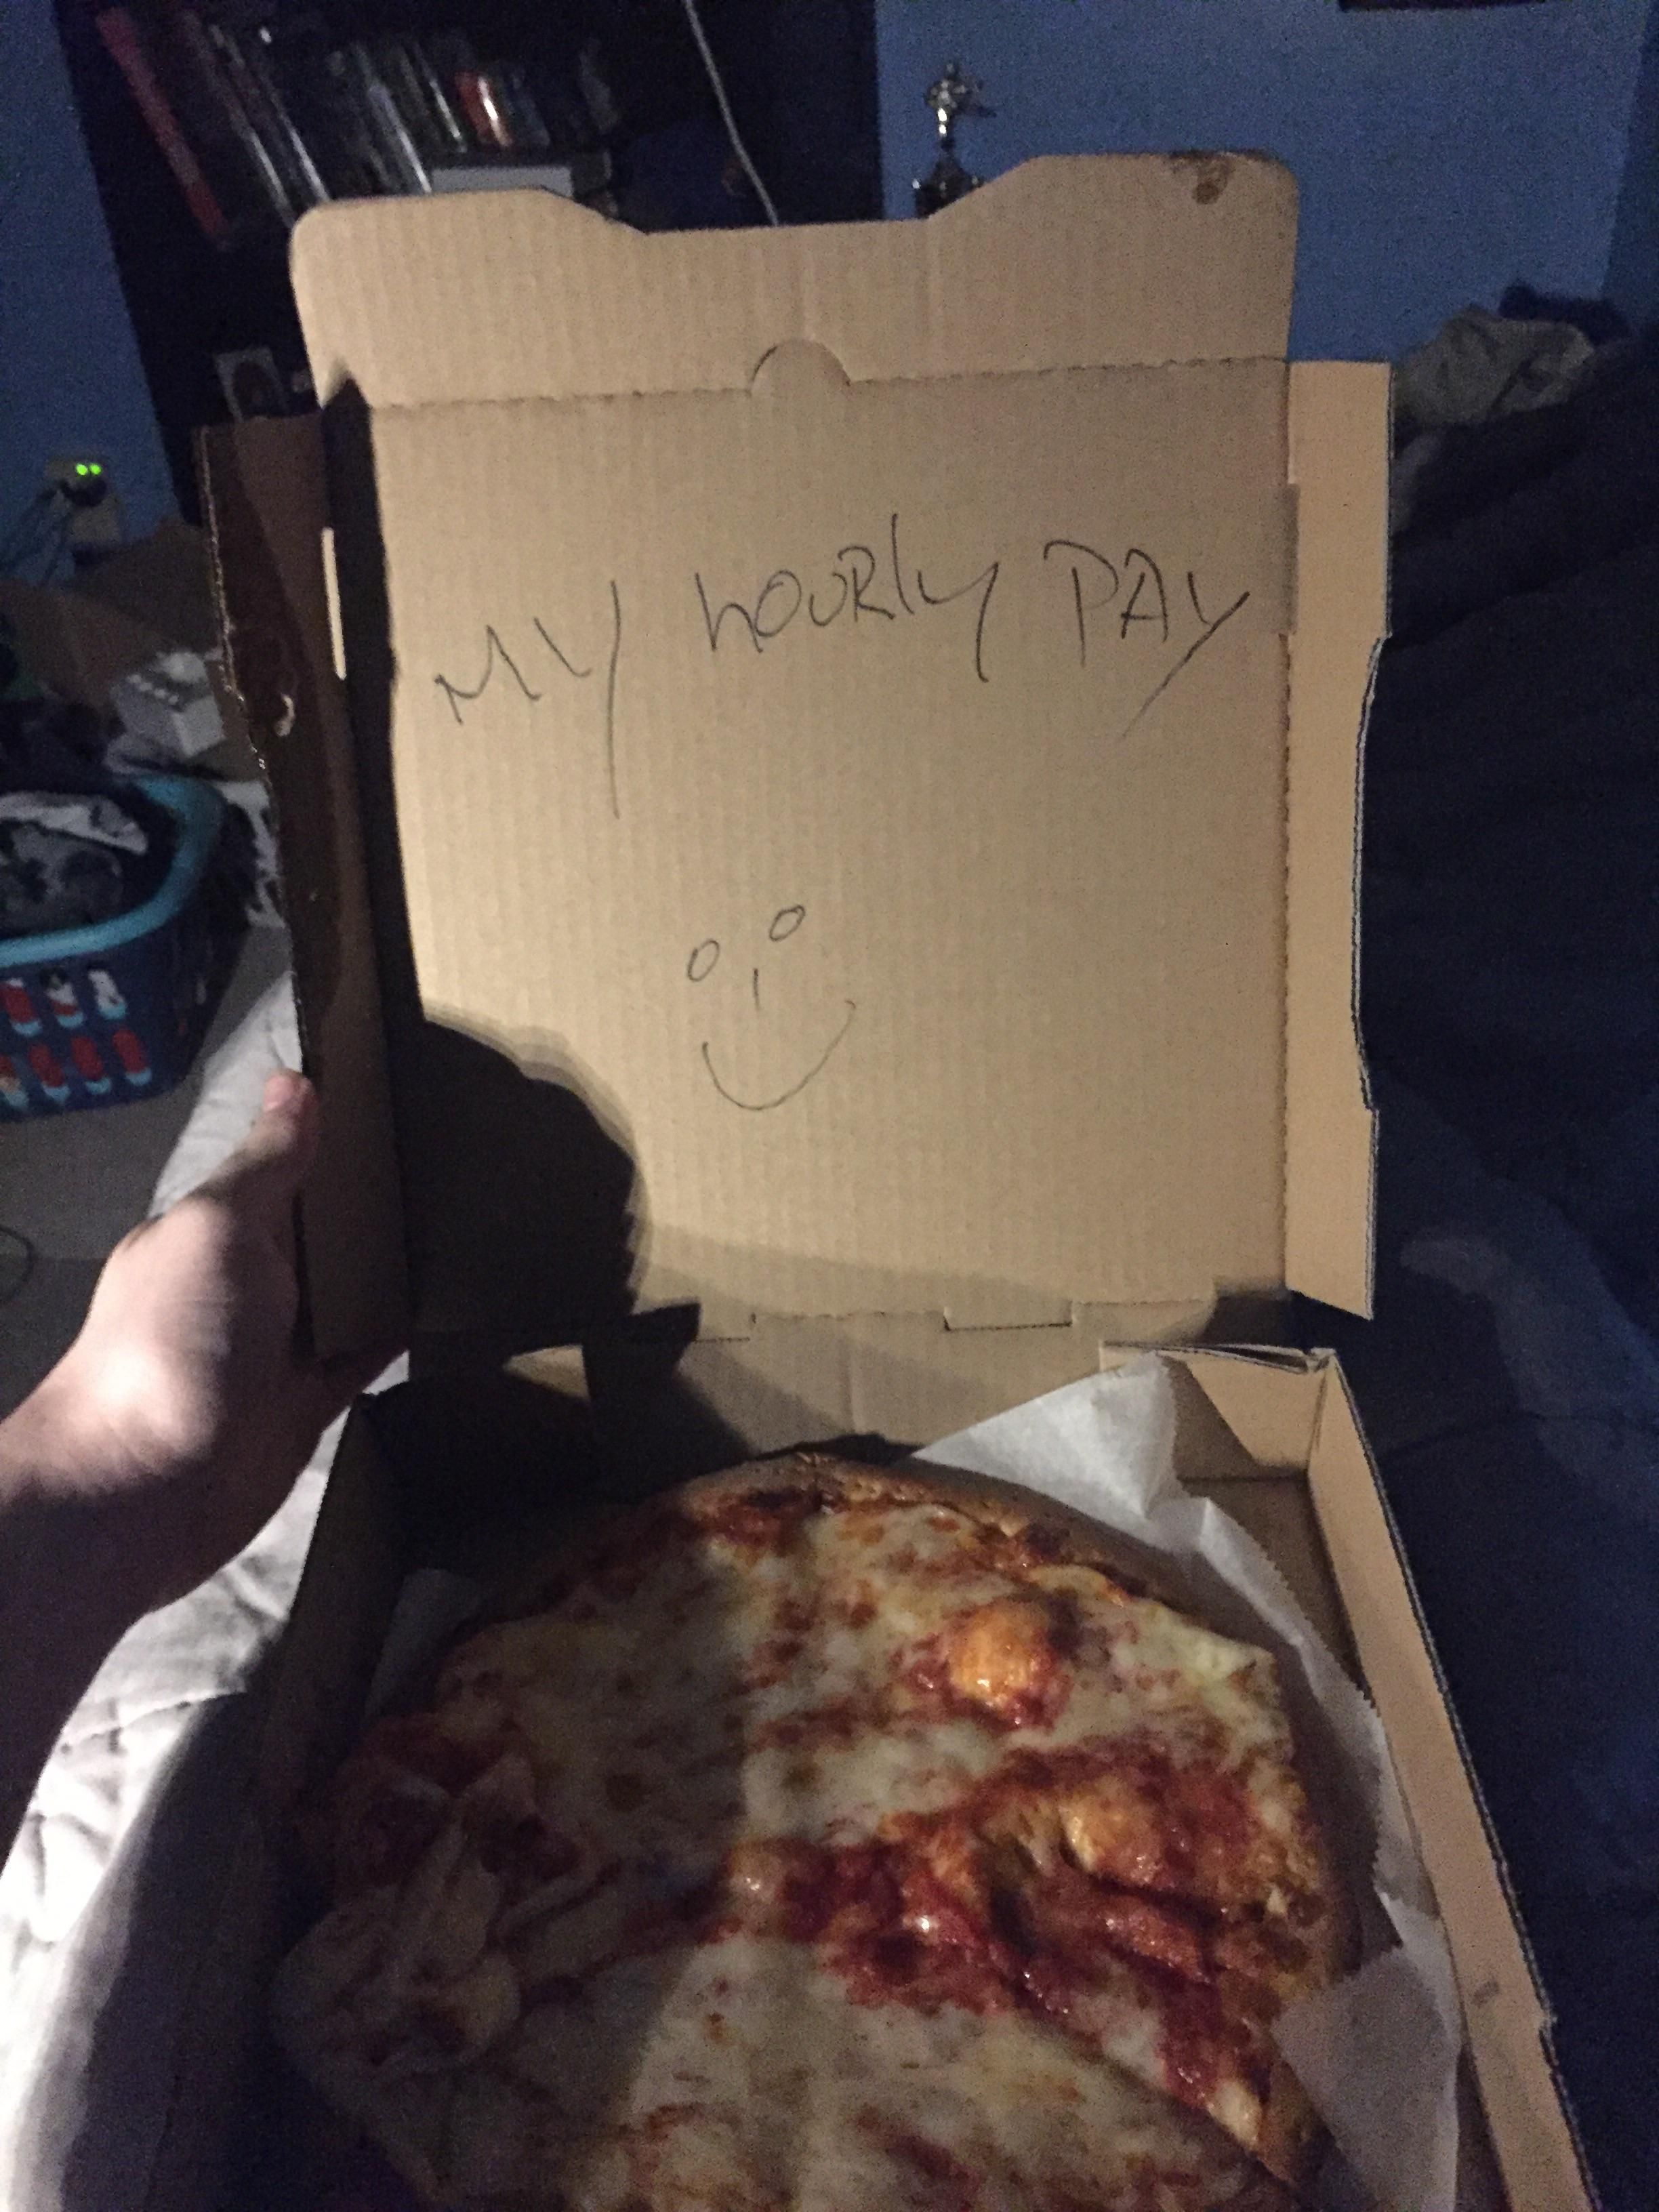 Ordered a pizza and asked for a joke, and this is what I got